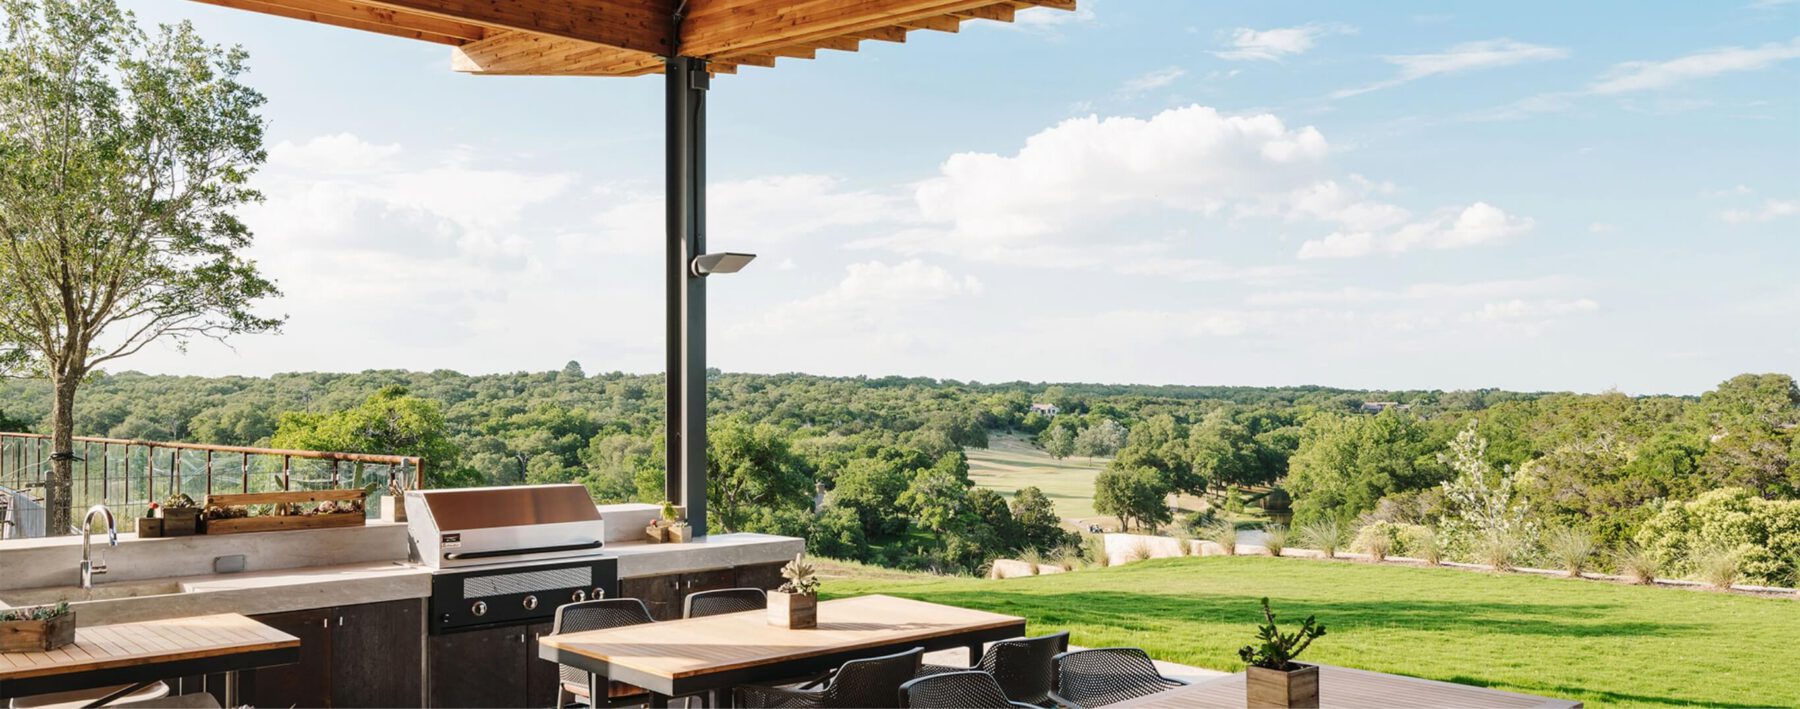 The outdoor grilling area at Wolf Ranch which looks out over the groves of trees.